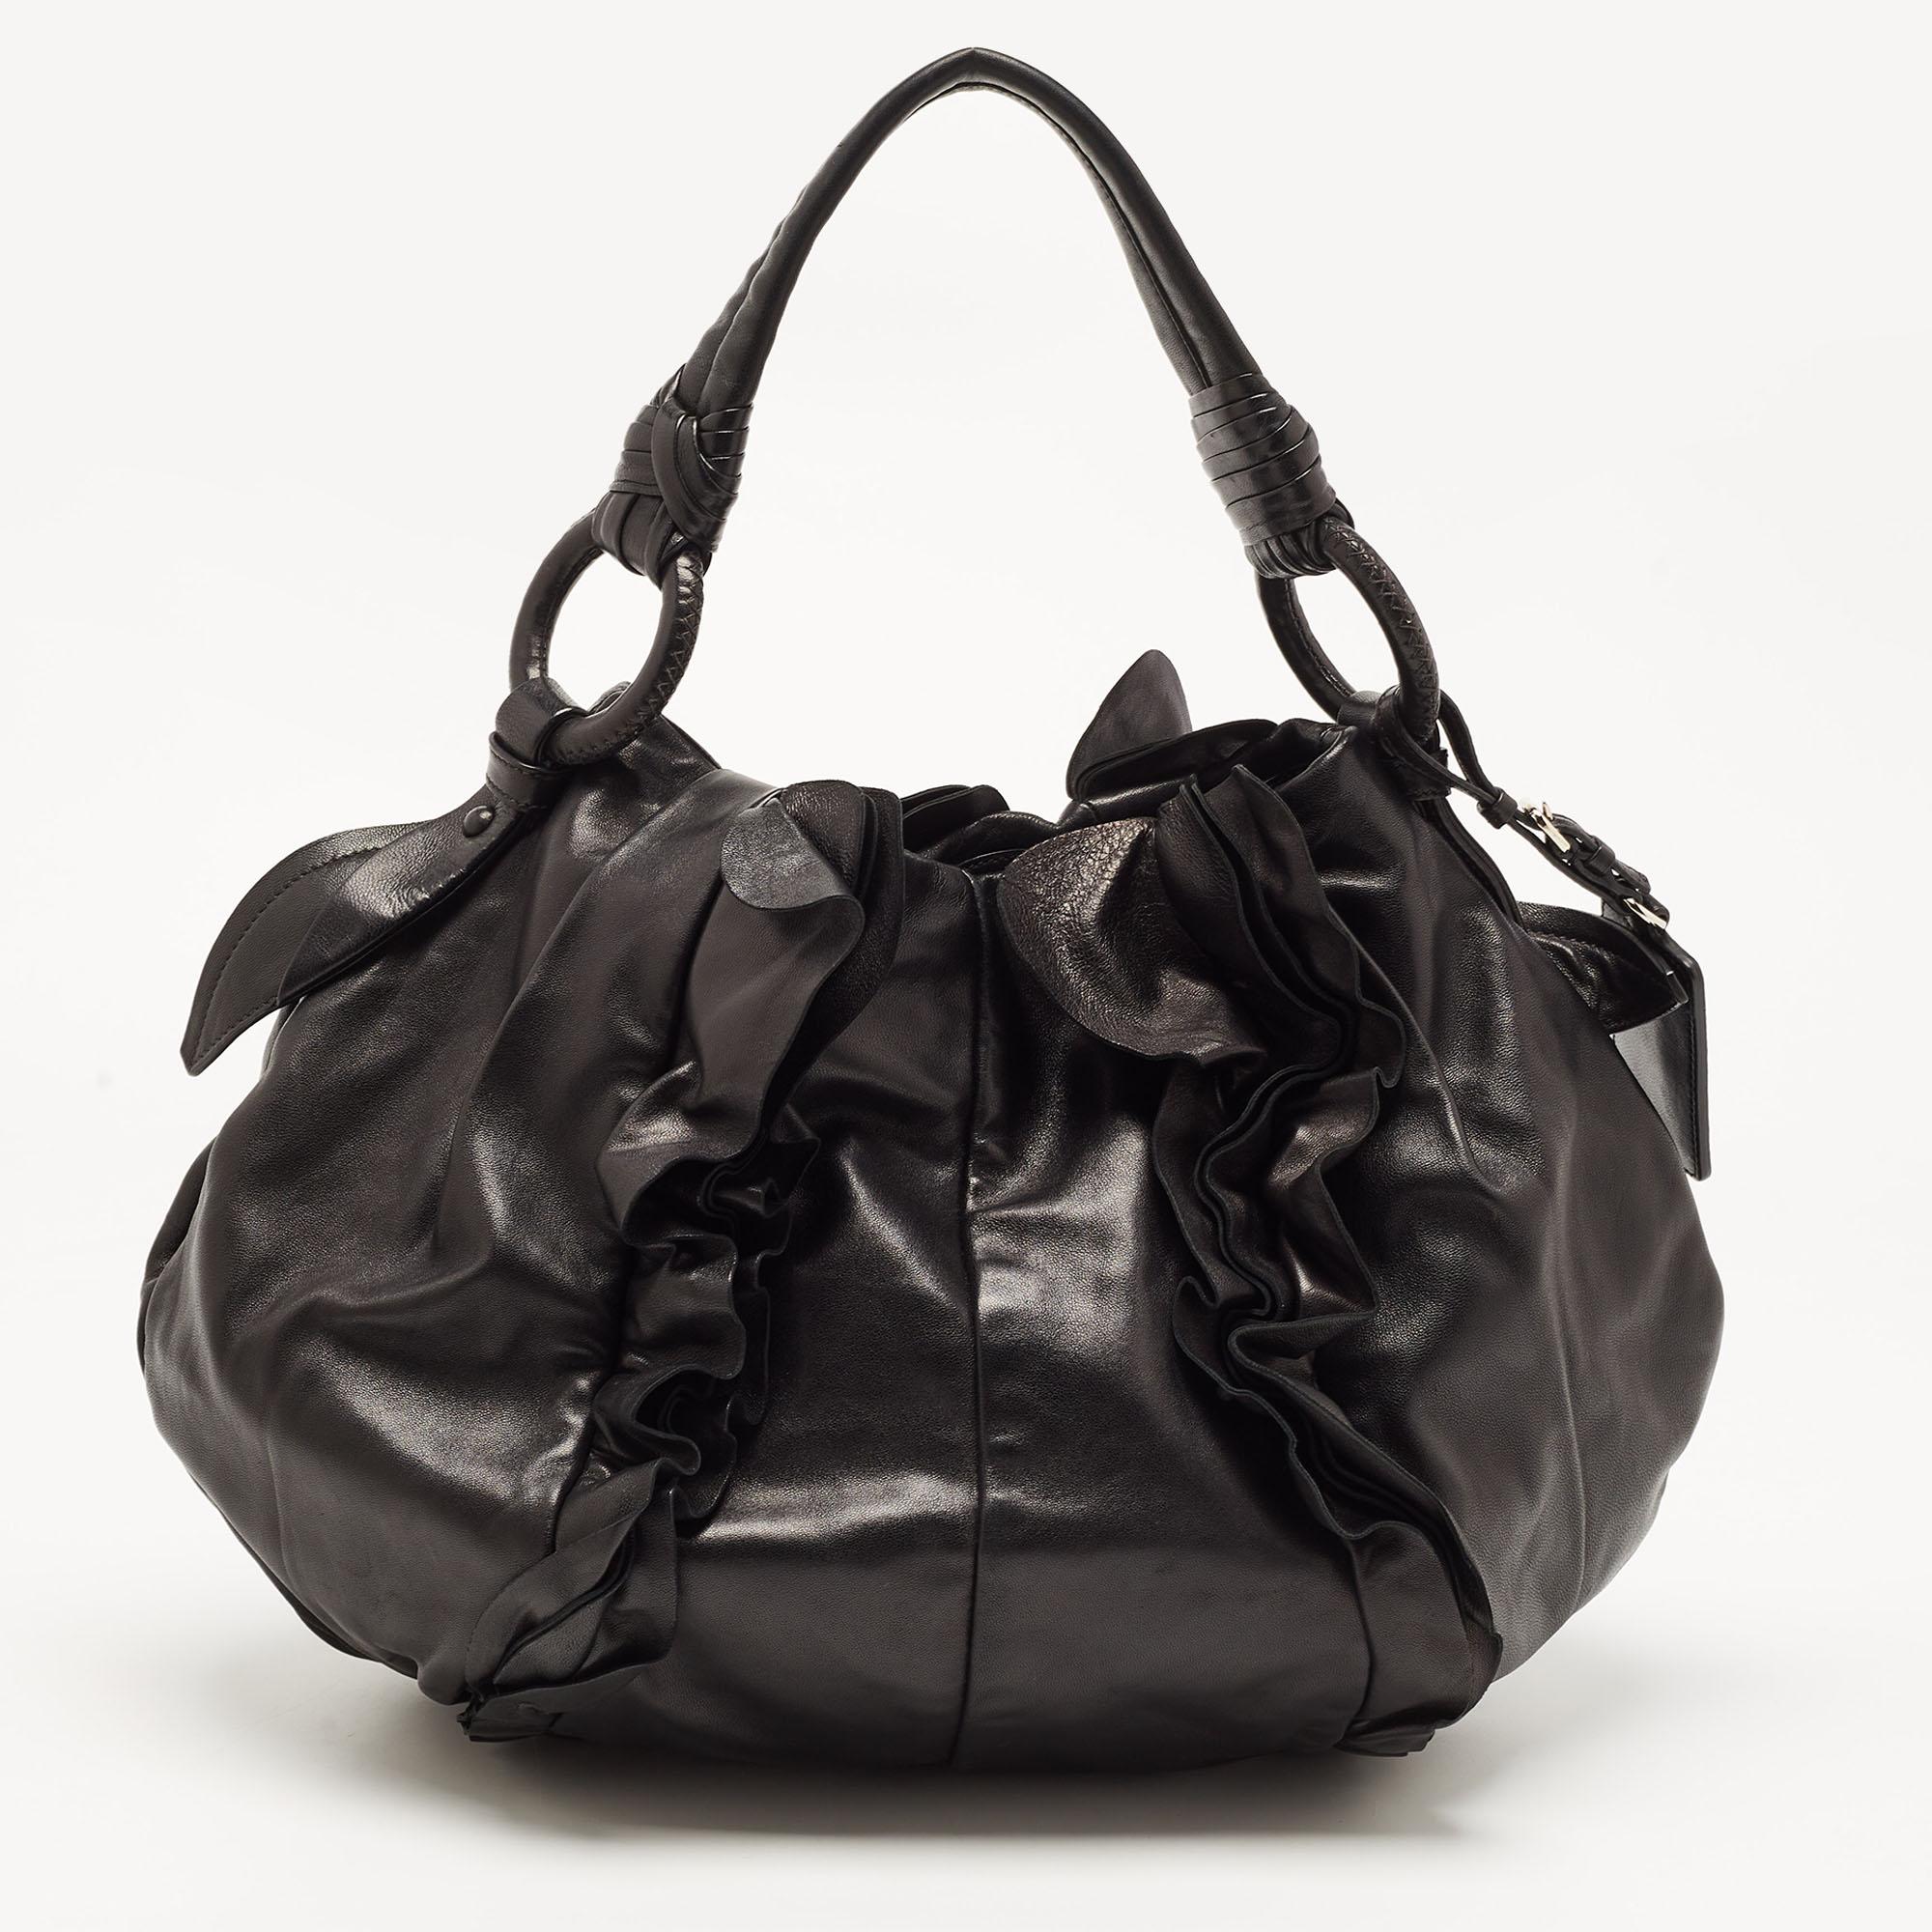 For a look that is complete with style, taste, and a touch of luxe, this designer bag is the perfect addition. Flaunt this beauty on your shoulder and revel in the taste of luxury it leaves you with.

Includes: Original Dustbag

